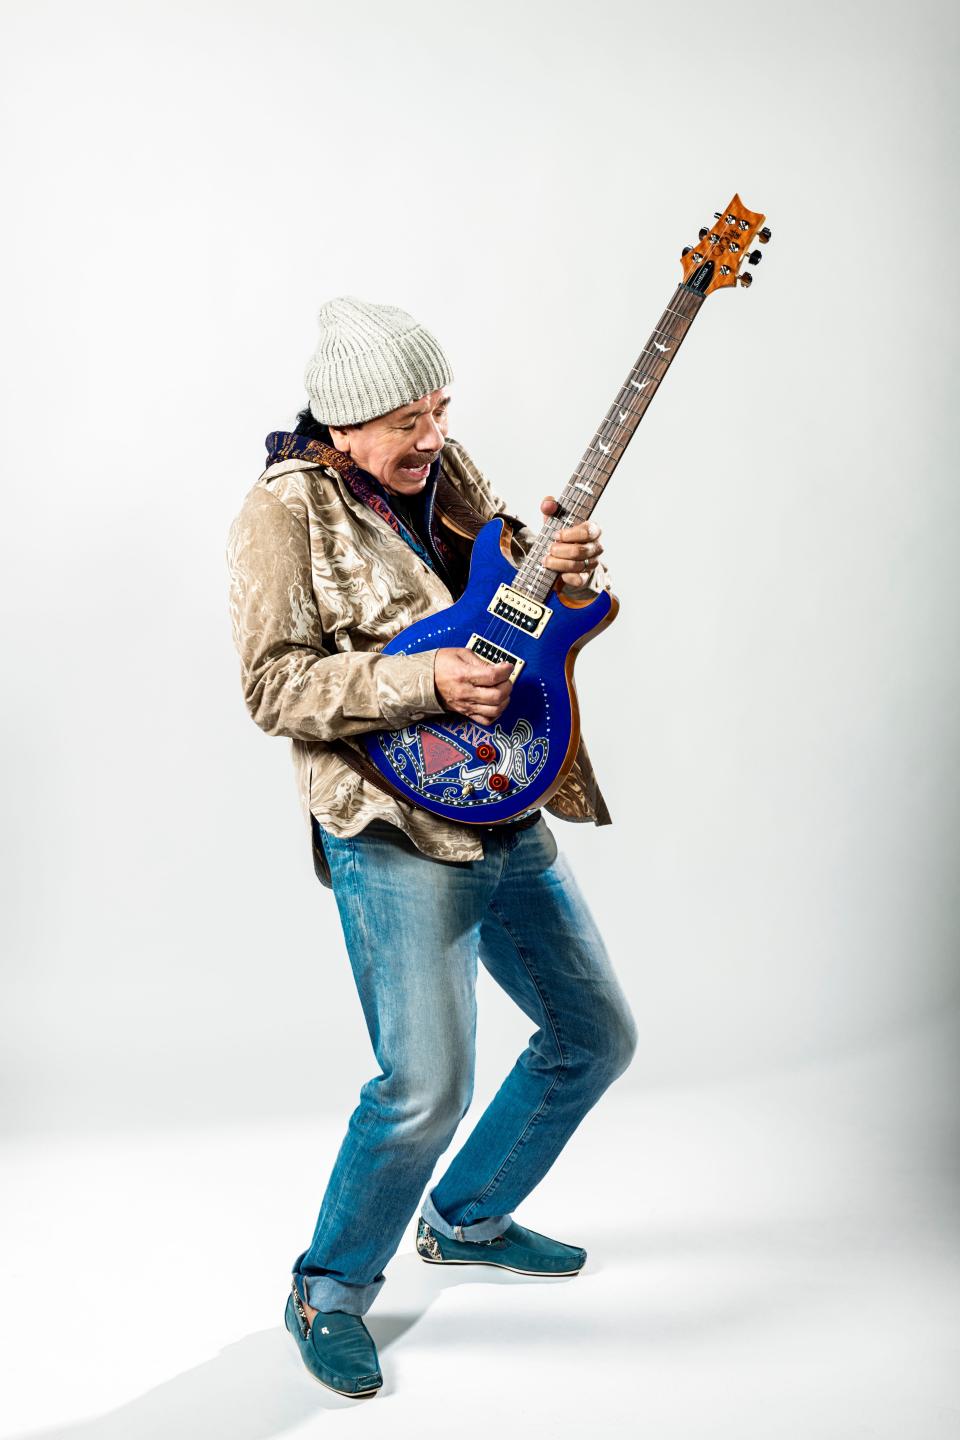 Legendary guitarist Carlos Santana will perform at the Ford Center on April 13.